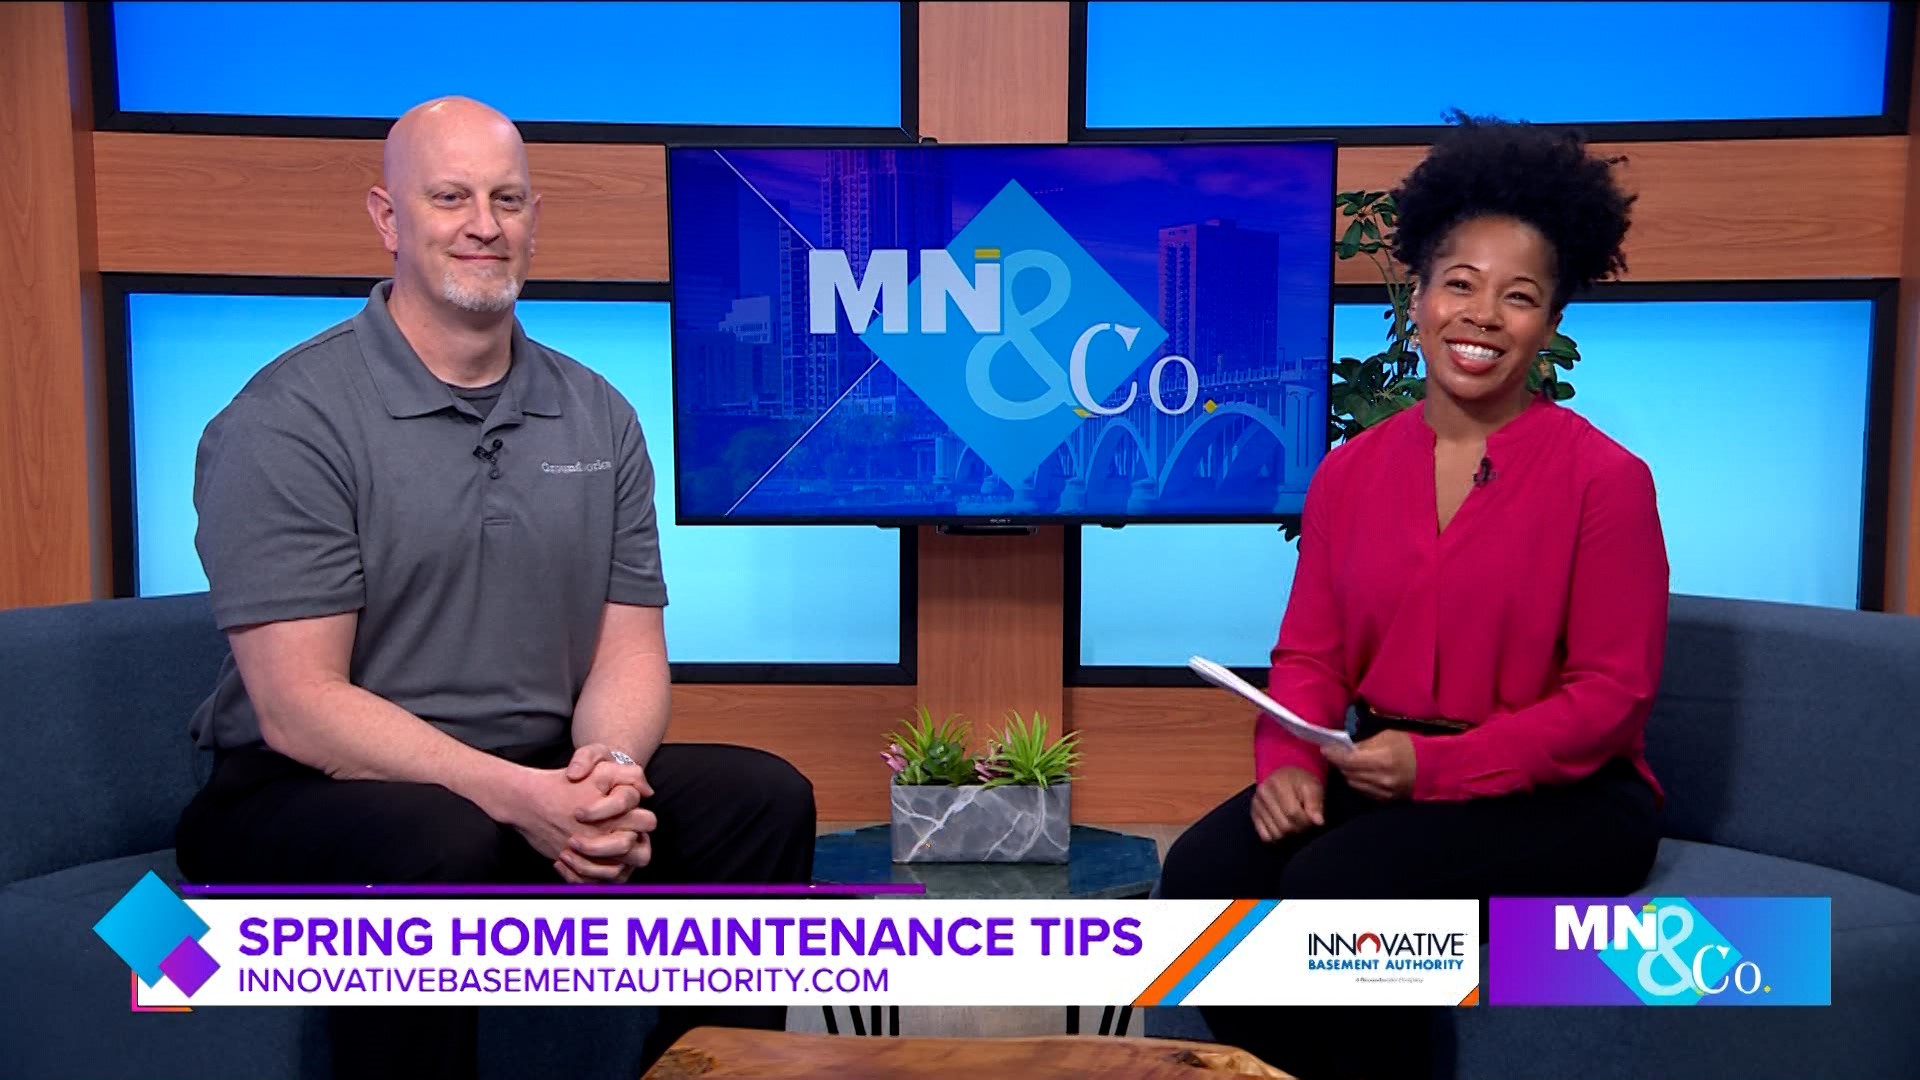 Innovative Basement Authority joins Minnesota and Company to discuss how to prepare your foundation or basement for spring.